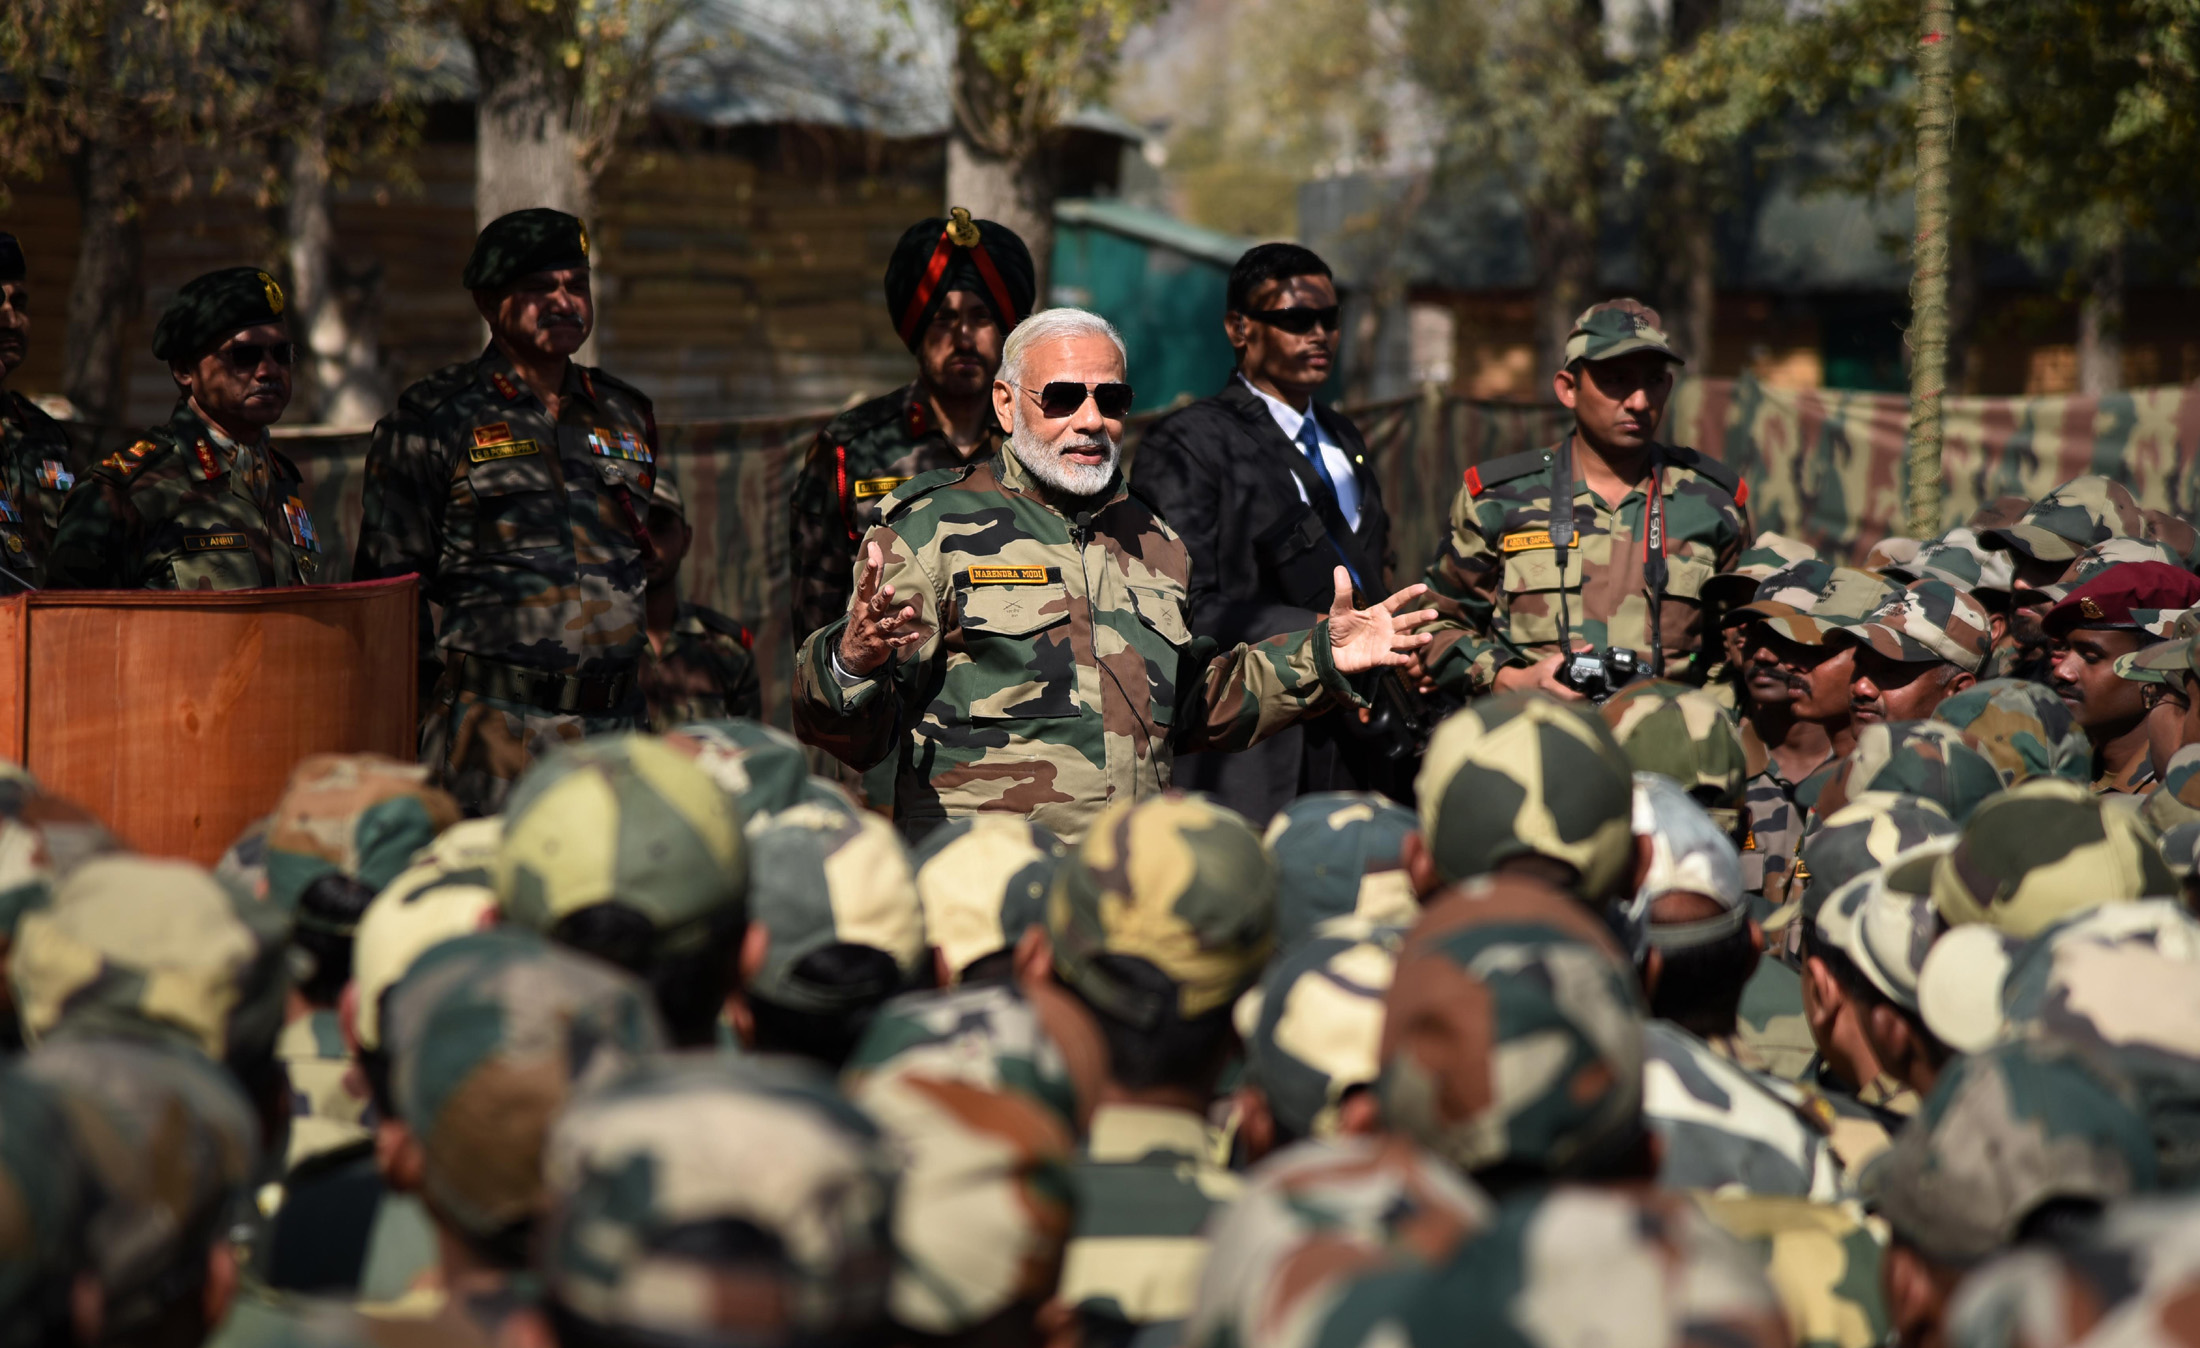 The Prime Minister, Shri Narendra Modi celebrating the Diwali with the jawans of the Indian Army and BSF, in the Gurez Valley, near the Line of Control, in Jammu and Kashmir, on October 19, 2017.